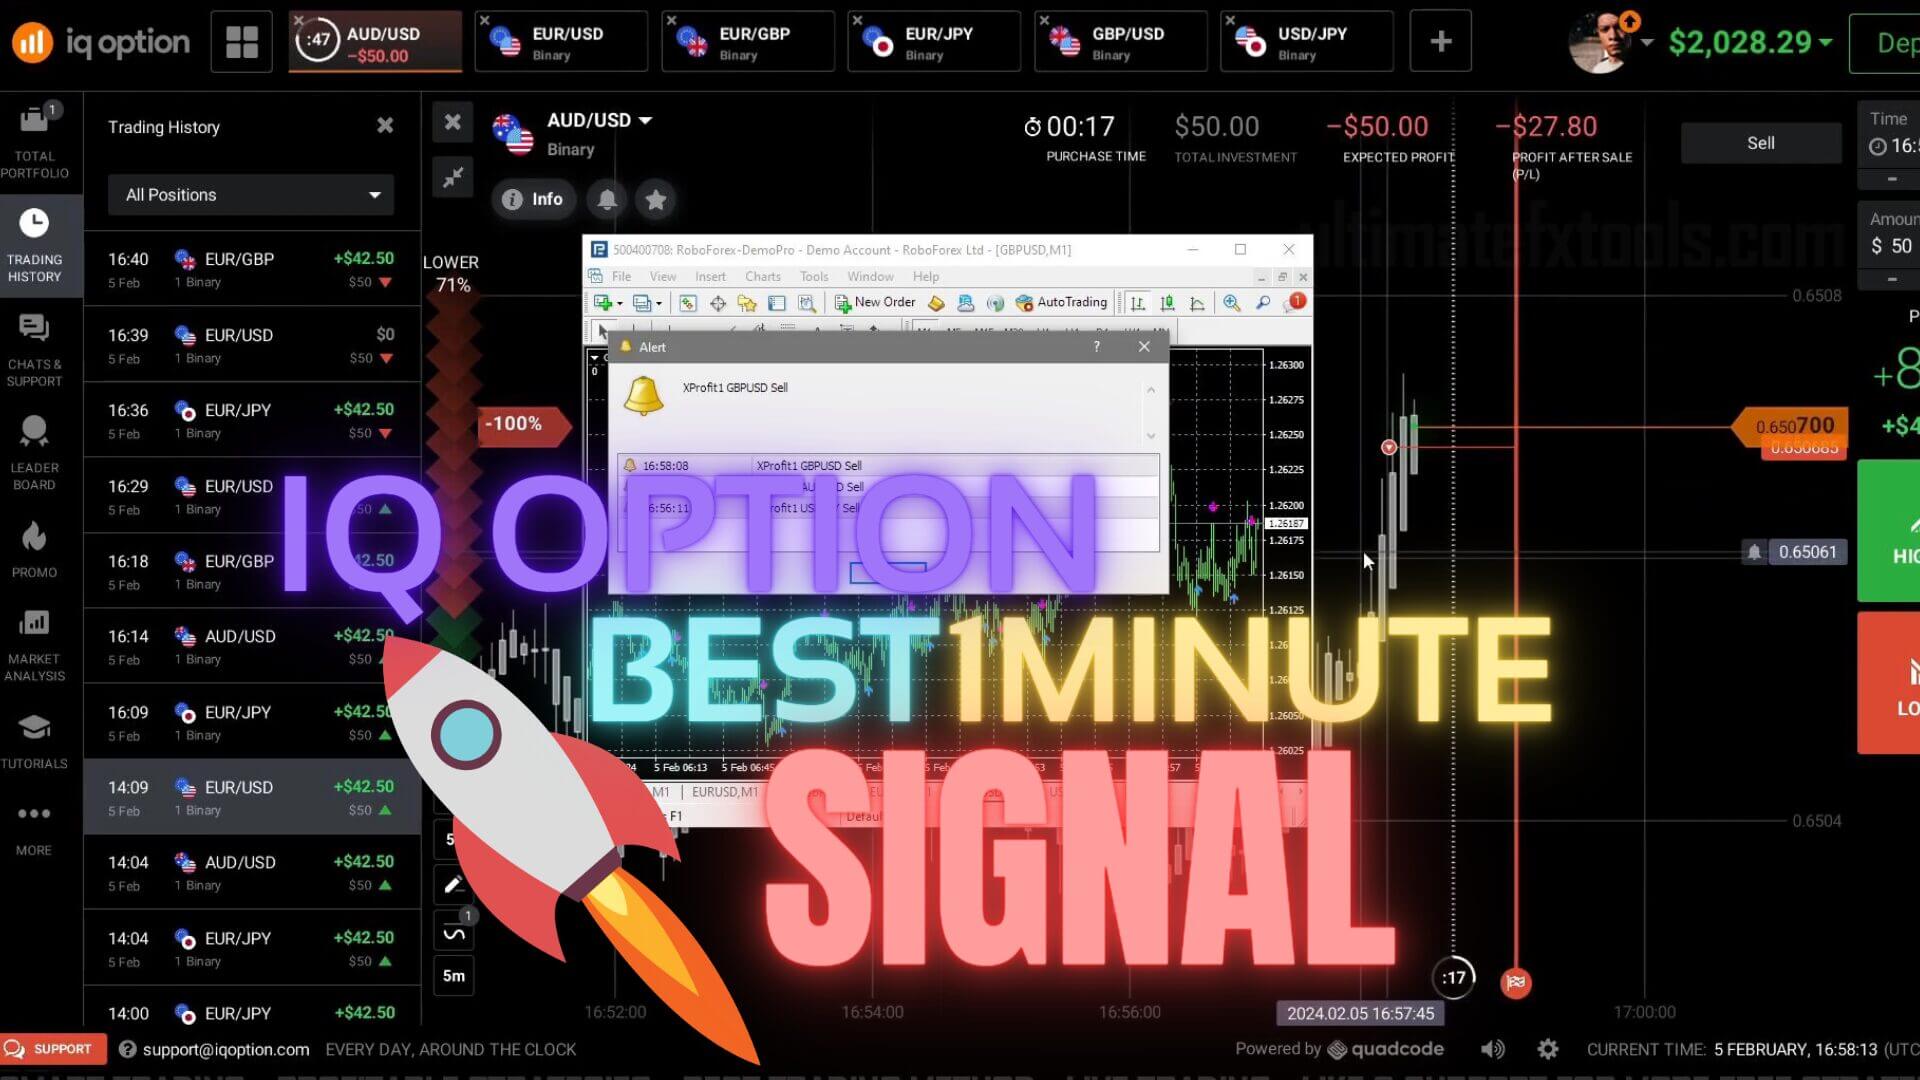 How to use XProfit V2 Indicator in IQ Option